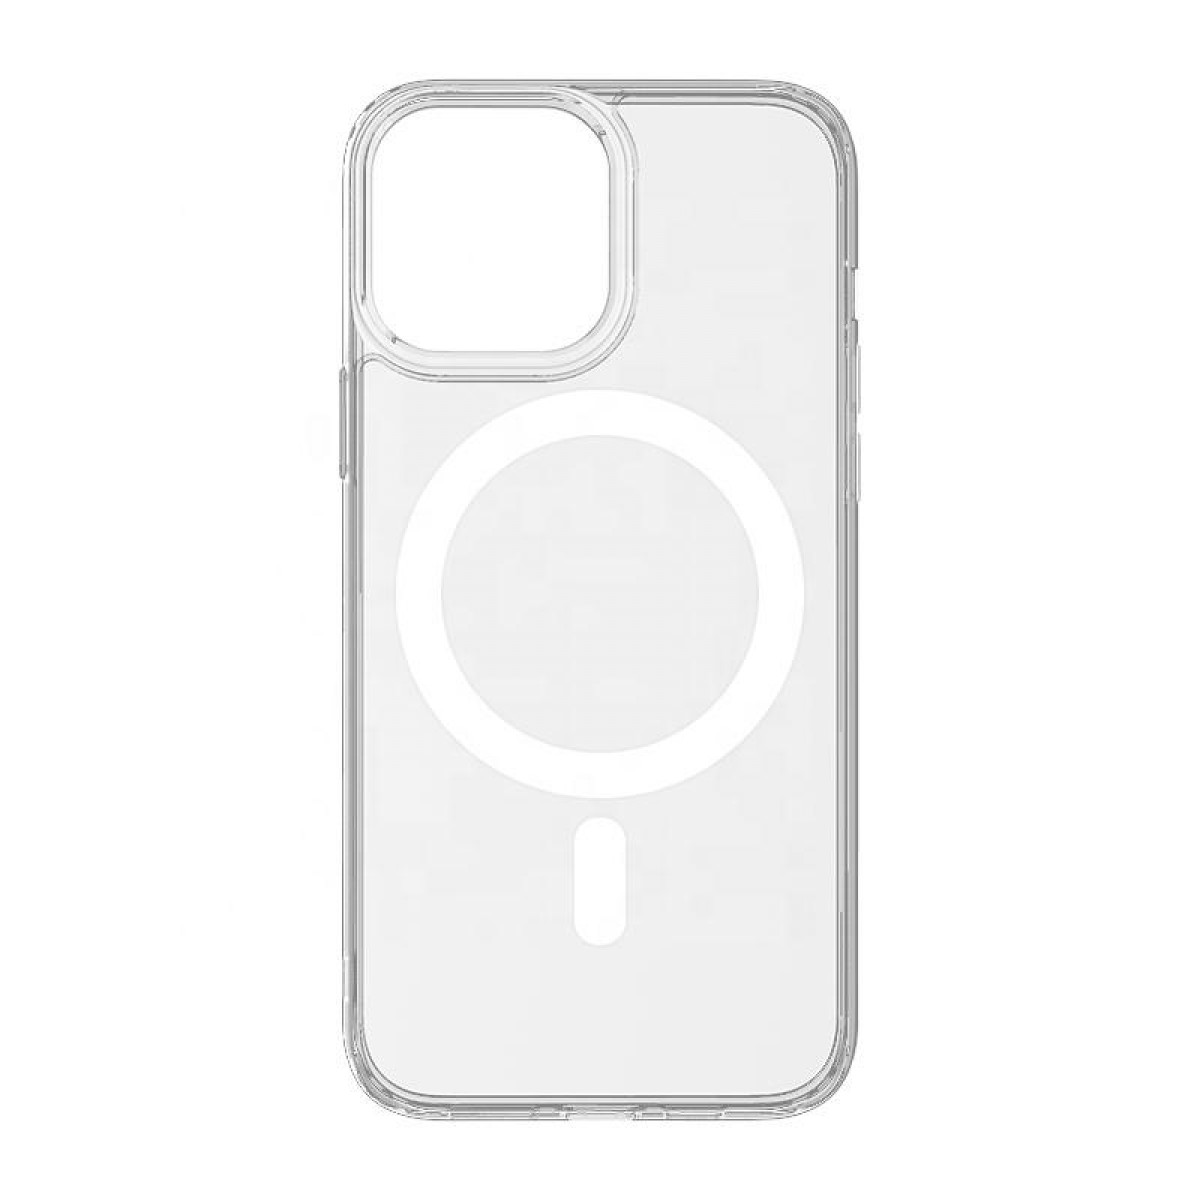 INF iPhone Max, 11 Transparent, 11 Pro Weiß iPhone Max Pro MagSafe-Ladegerät Handyhülle für Backcover, iPhone,